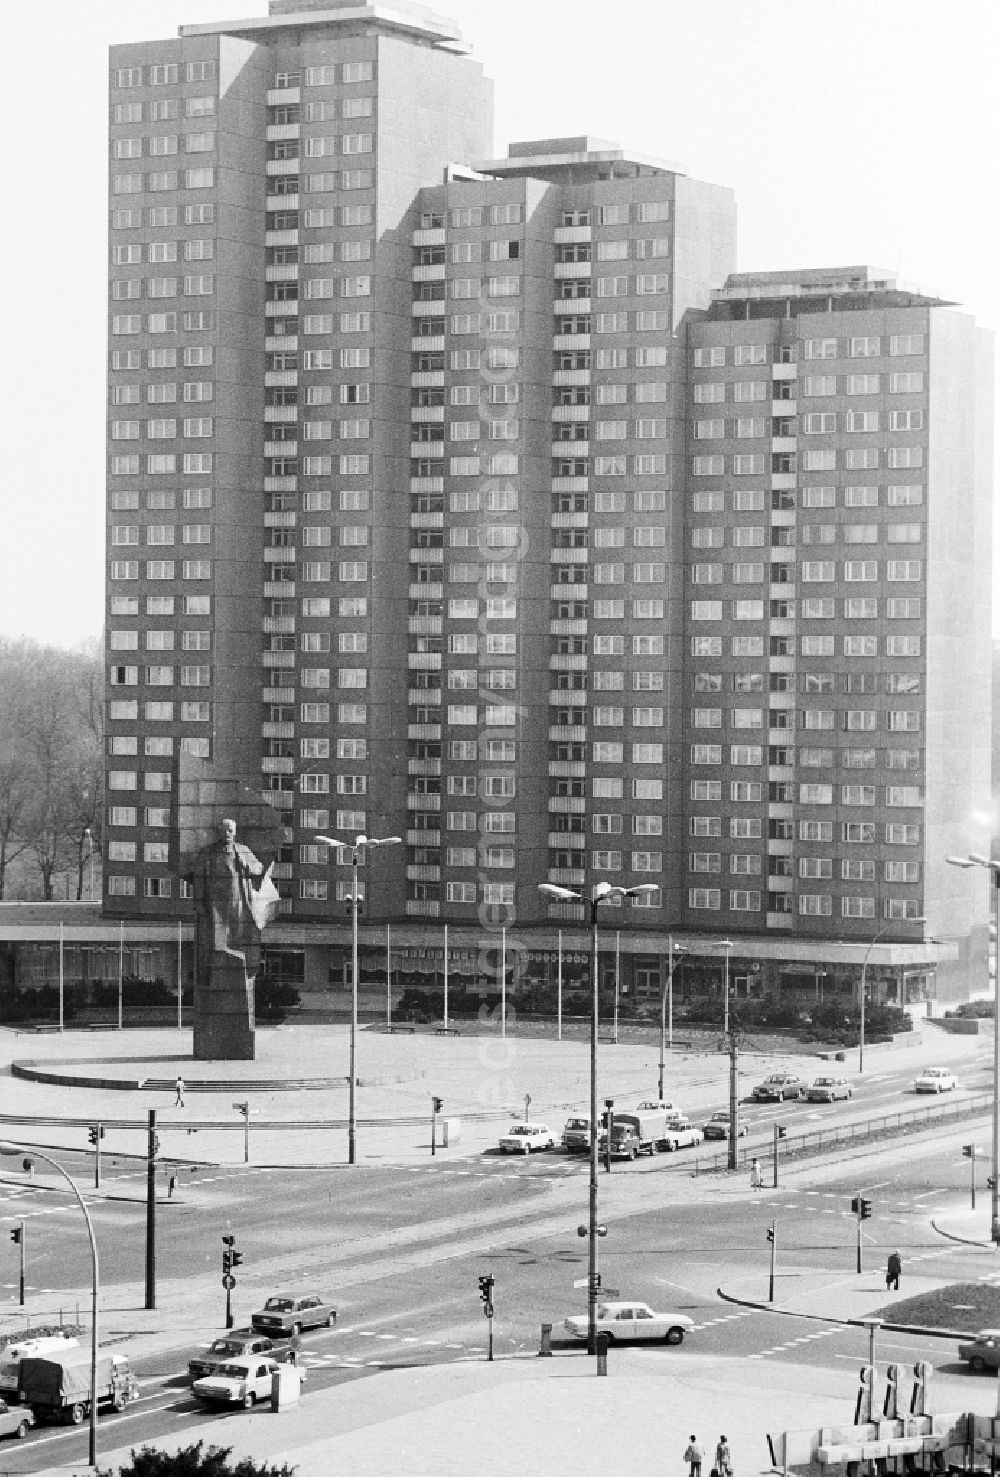 GDR image archive: Berlin - The place Lenin, today place of the United Nations, with which Lenin monument and dwelling houses in the Landsberger avenue in the district Friedrich's grove in Berlin, the former capital of the GDR, German democratic republic